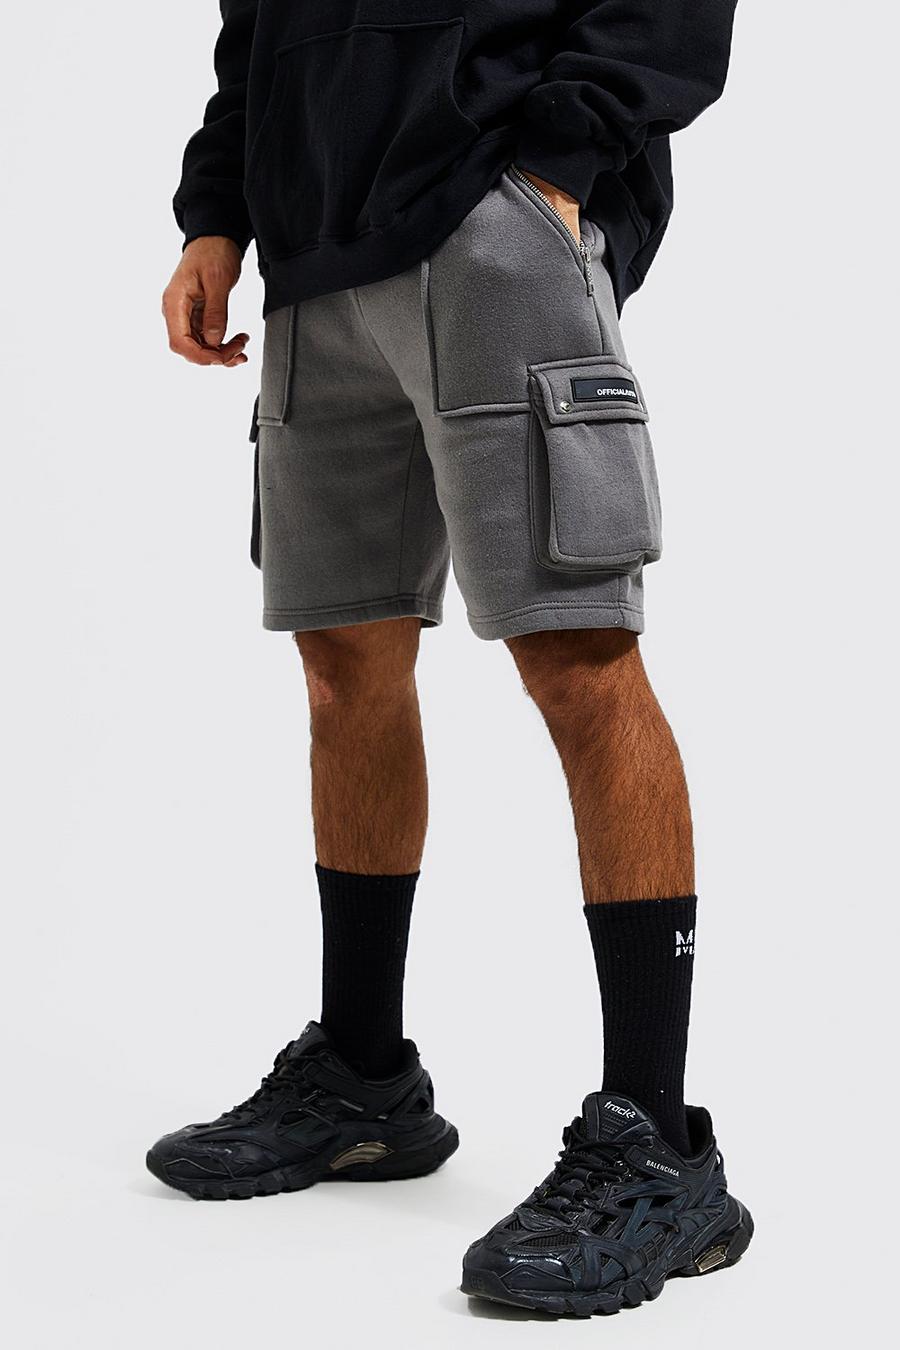 Official Cargo Jersey-Shorts, Charcoal grey